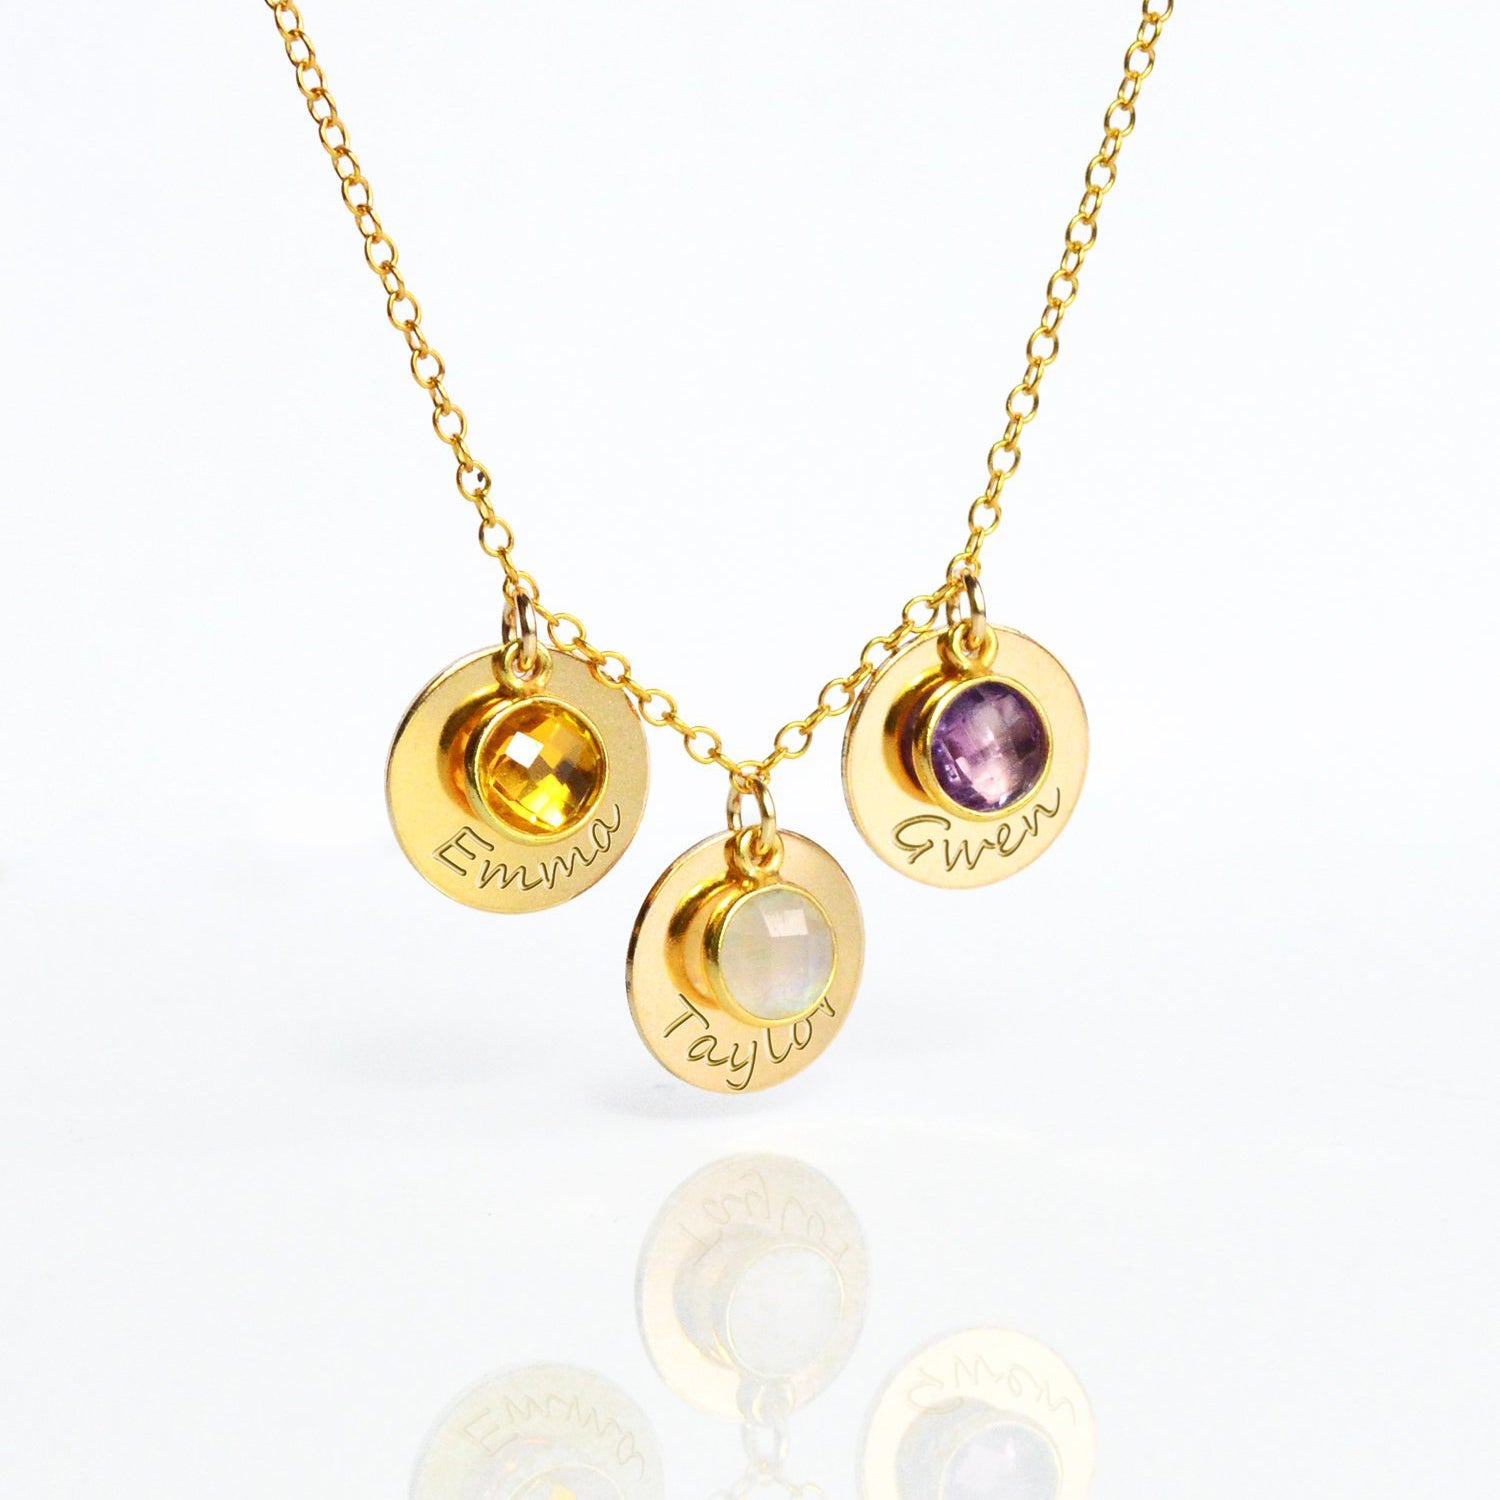 Nana Yours Infinity Mother & Child 1-12 Birthstone Necklace for Women  w/0.8mm Chain - Yellow Gold Plated - Walmart.com